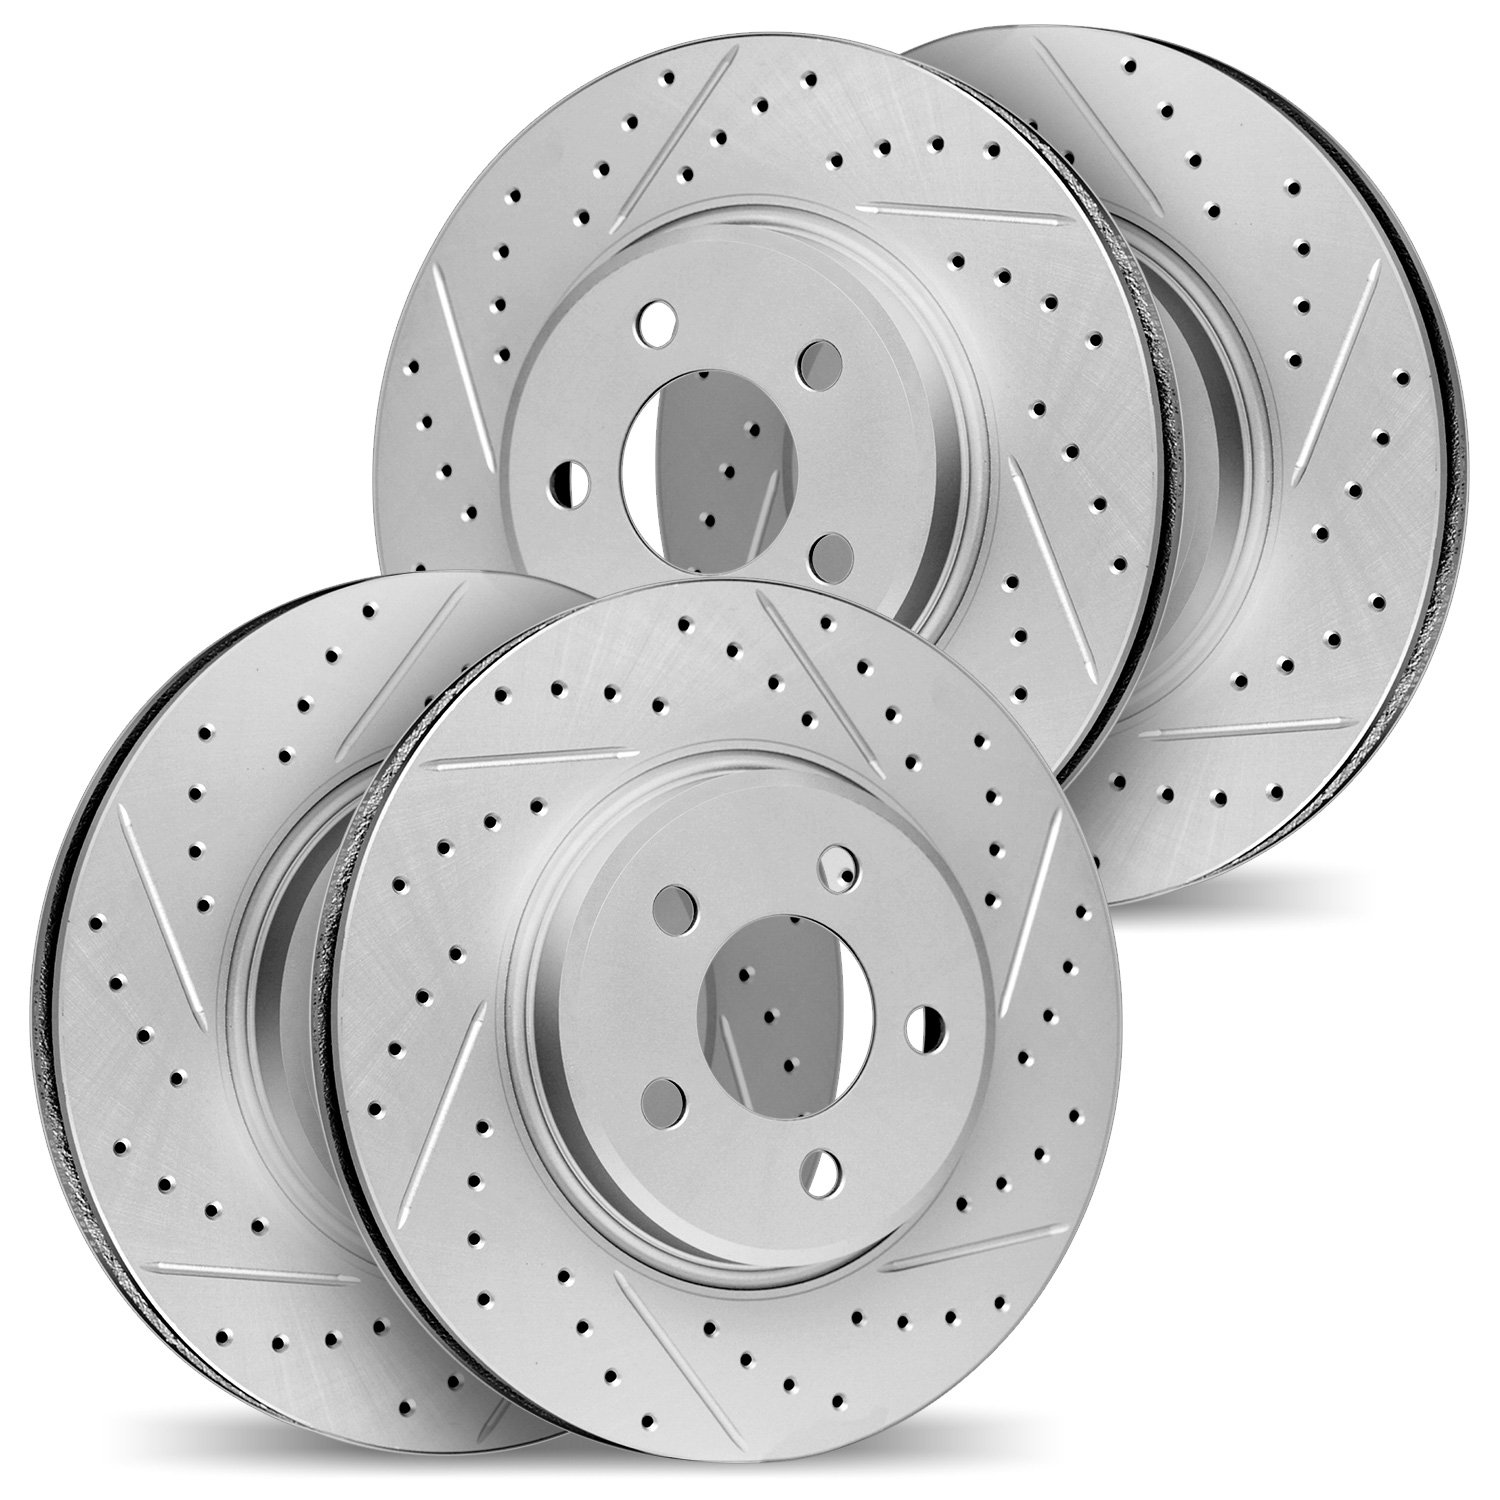 2004-54040 Geoperformance Drilled/Slotted Brake Rotors, 2007-2010 Ford/Lincoln/Mercury/Mazda, Position: Front and Rear